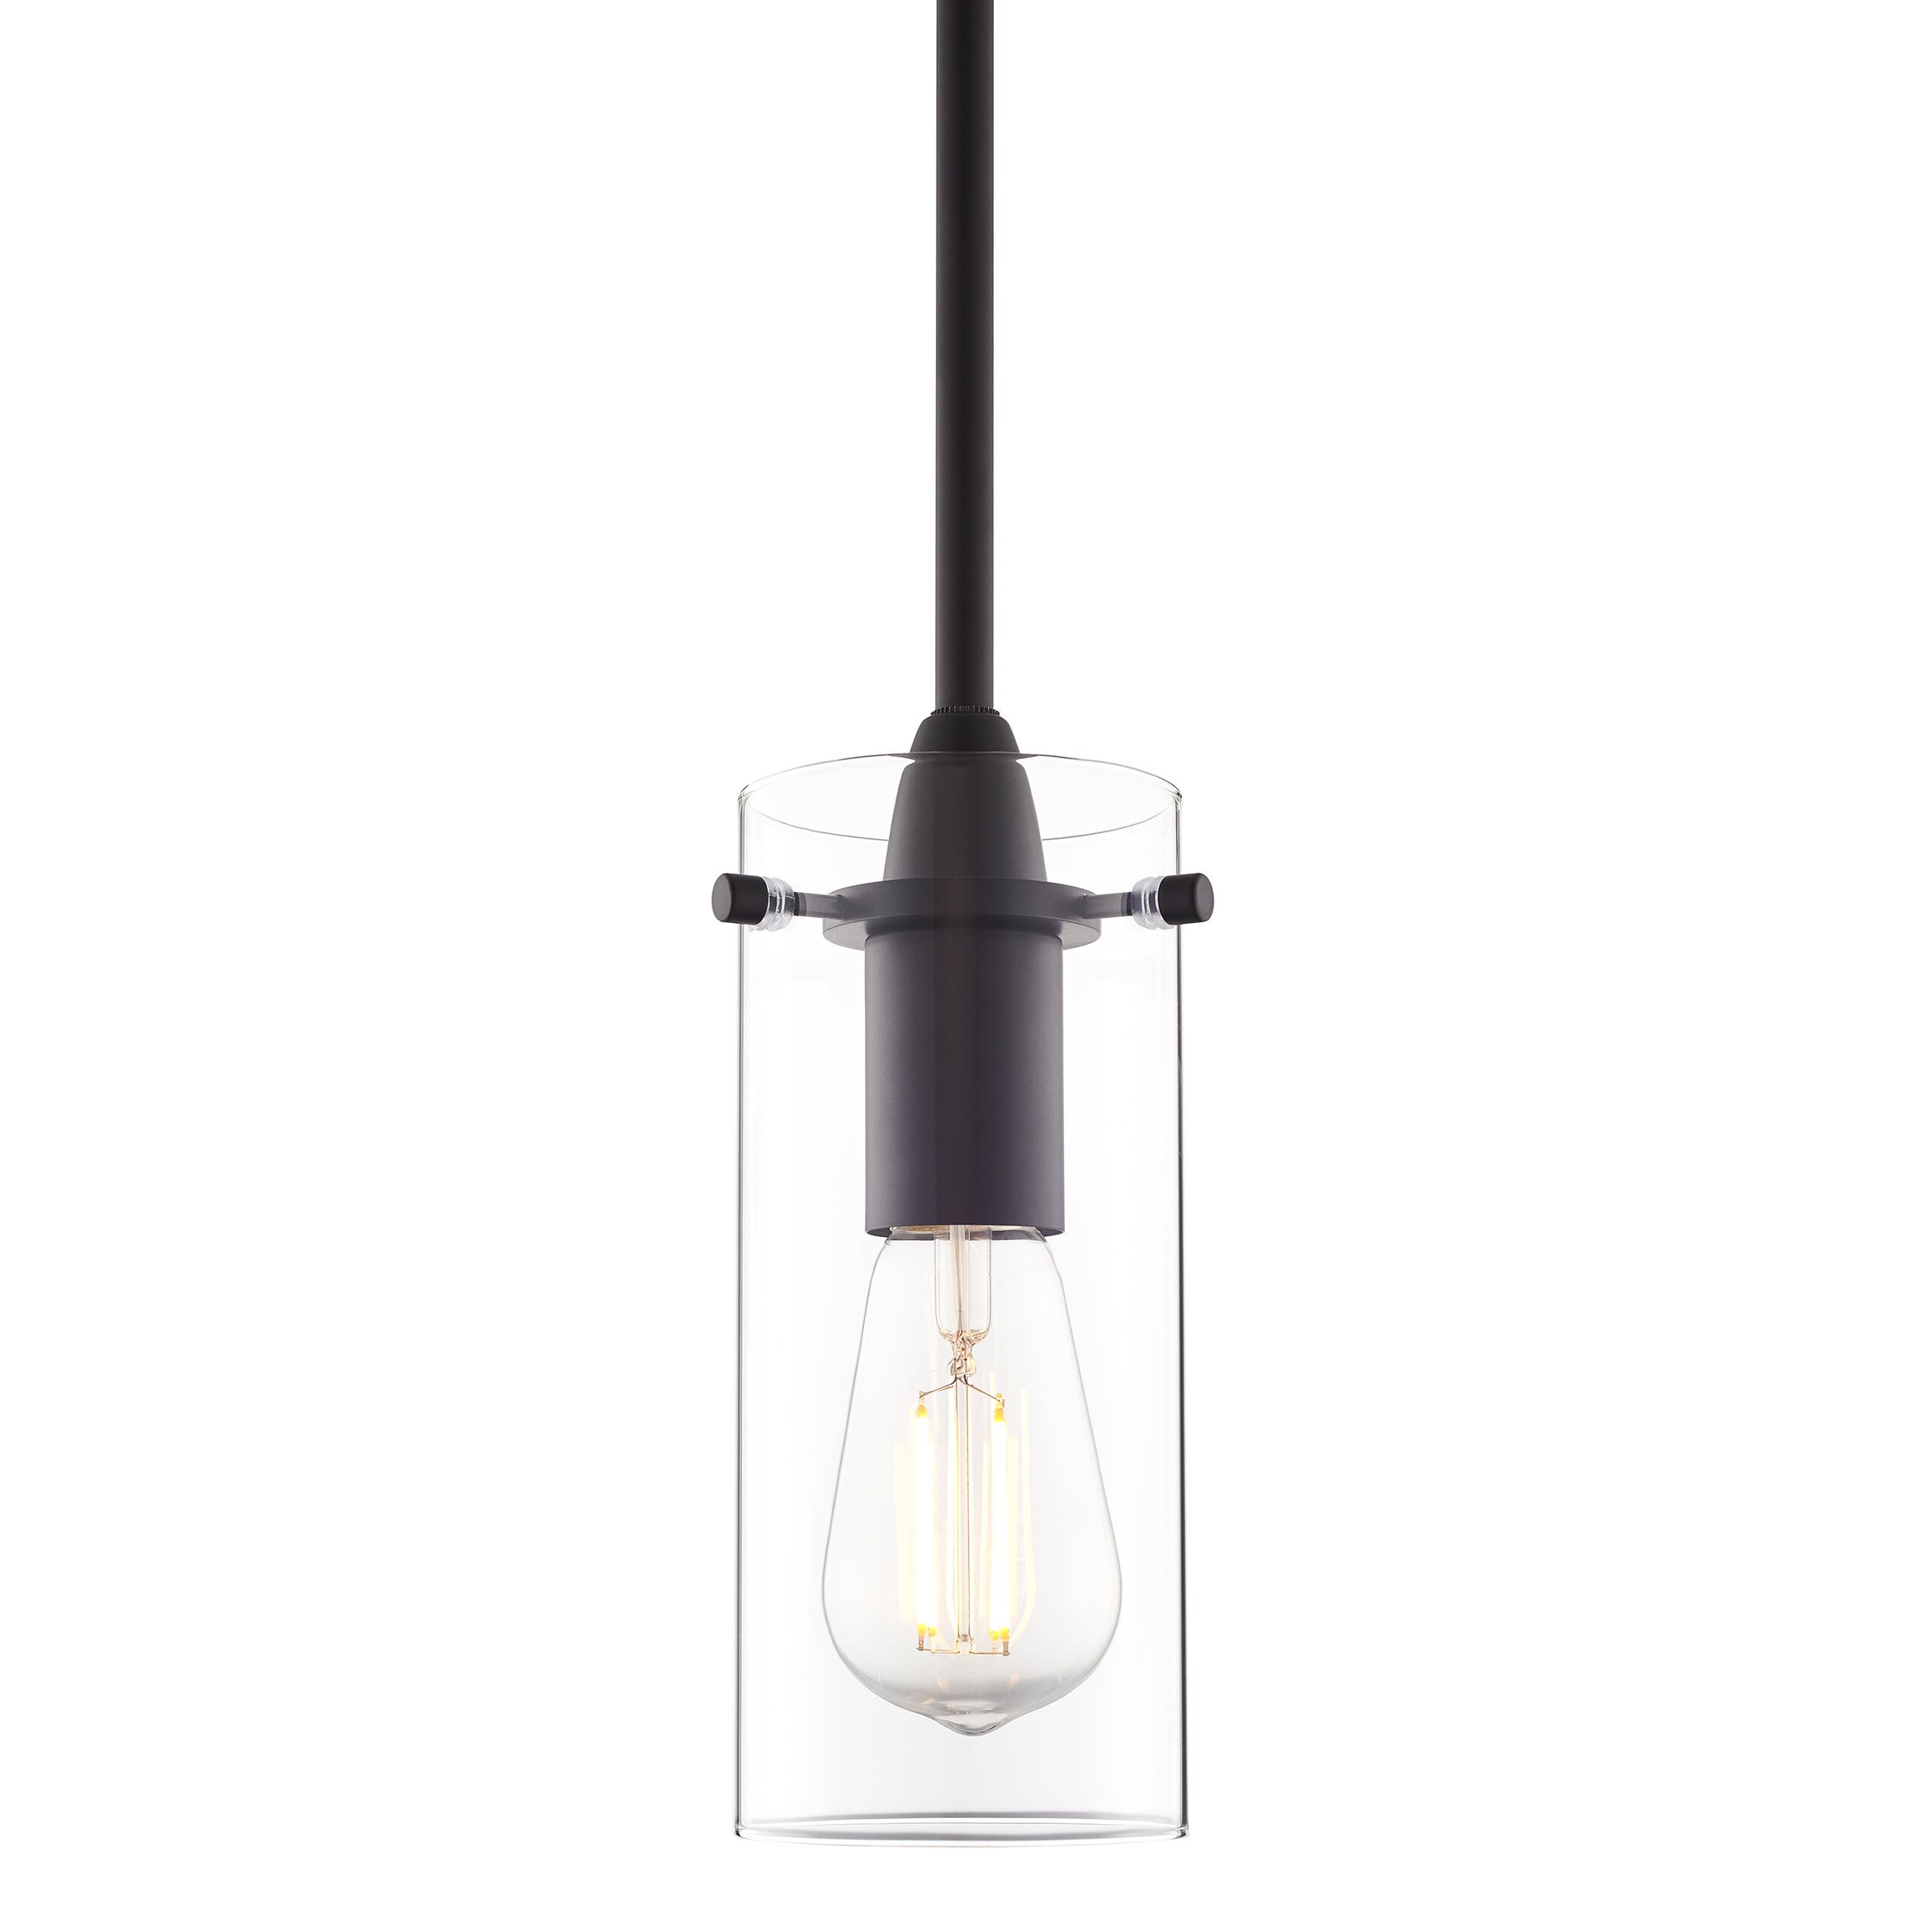 Ivy Bronx Angelina 1 Light Single Cylinder Pendant Within Most Current Melora 1 Light Single Geometric Pendants (View 25 of 25)